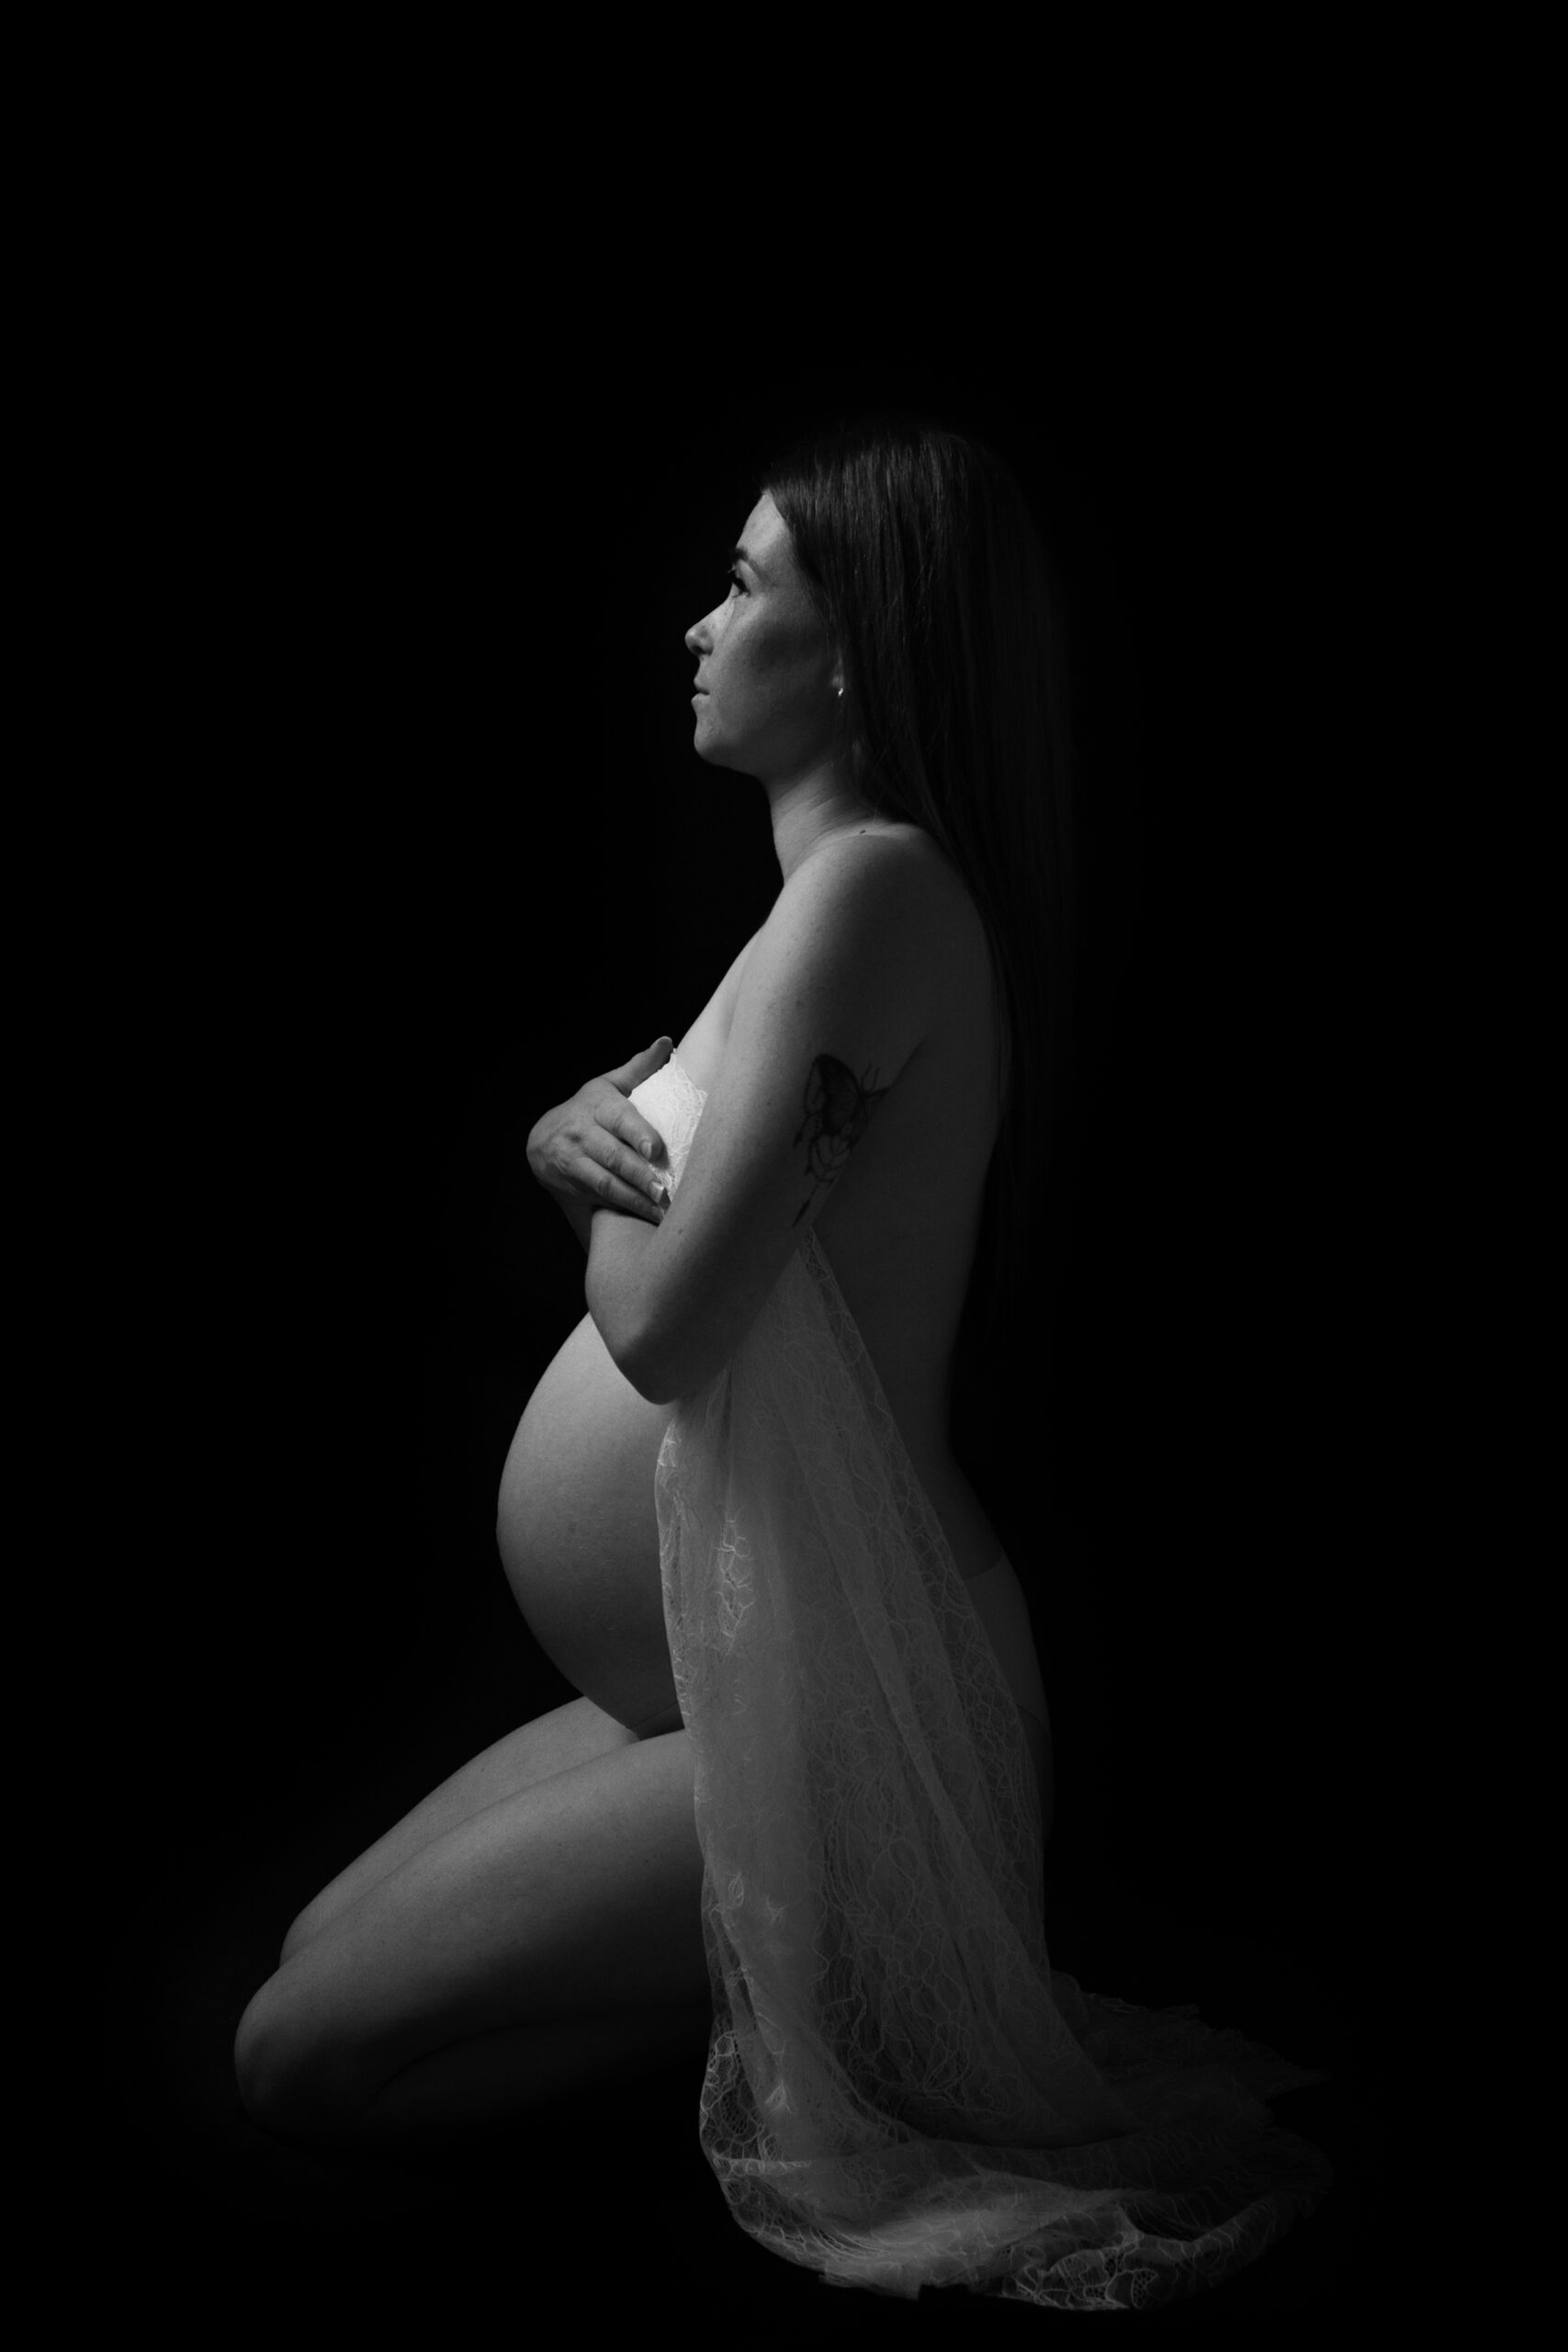 low light shot of pregnant woman empowering herself in studio maternity session showing off her raw baby belly - maternity photography by Jamie Simmons